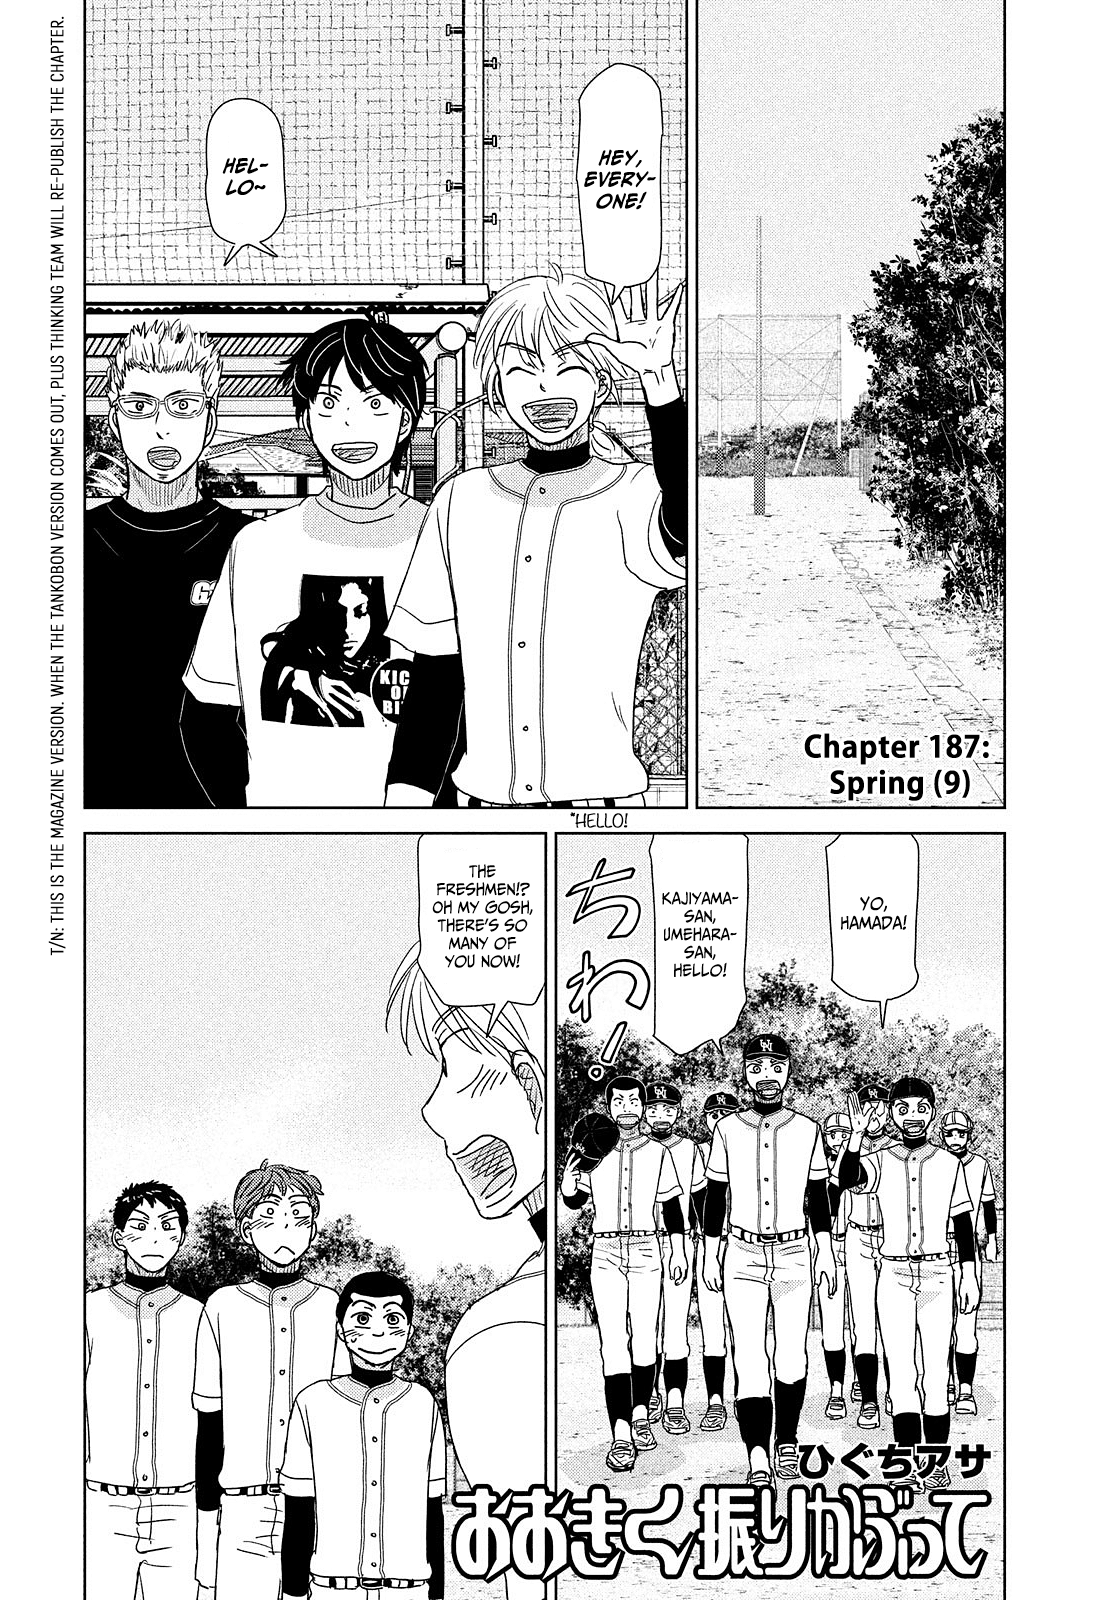 Ookiku Furikabutte Chapter 187: Spring (9) (Mag) - Picture 1